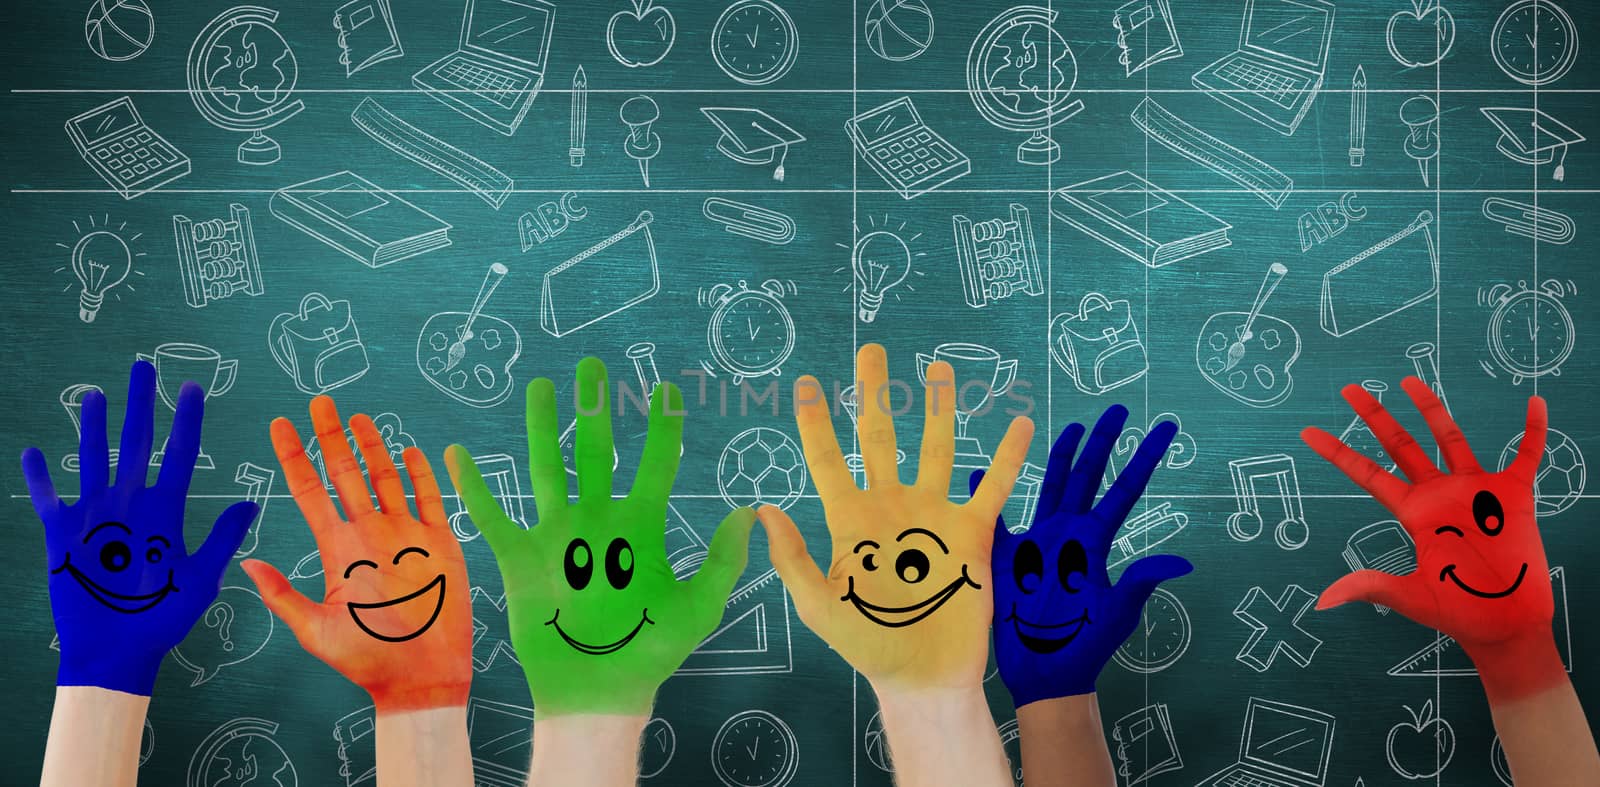 Hands with colourful smiley faces against green chalkboard